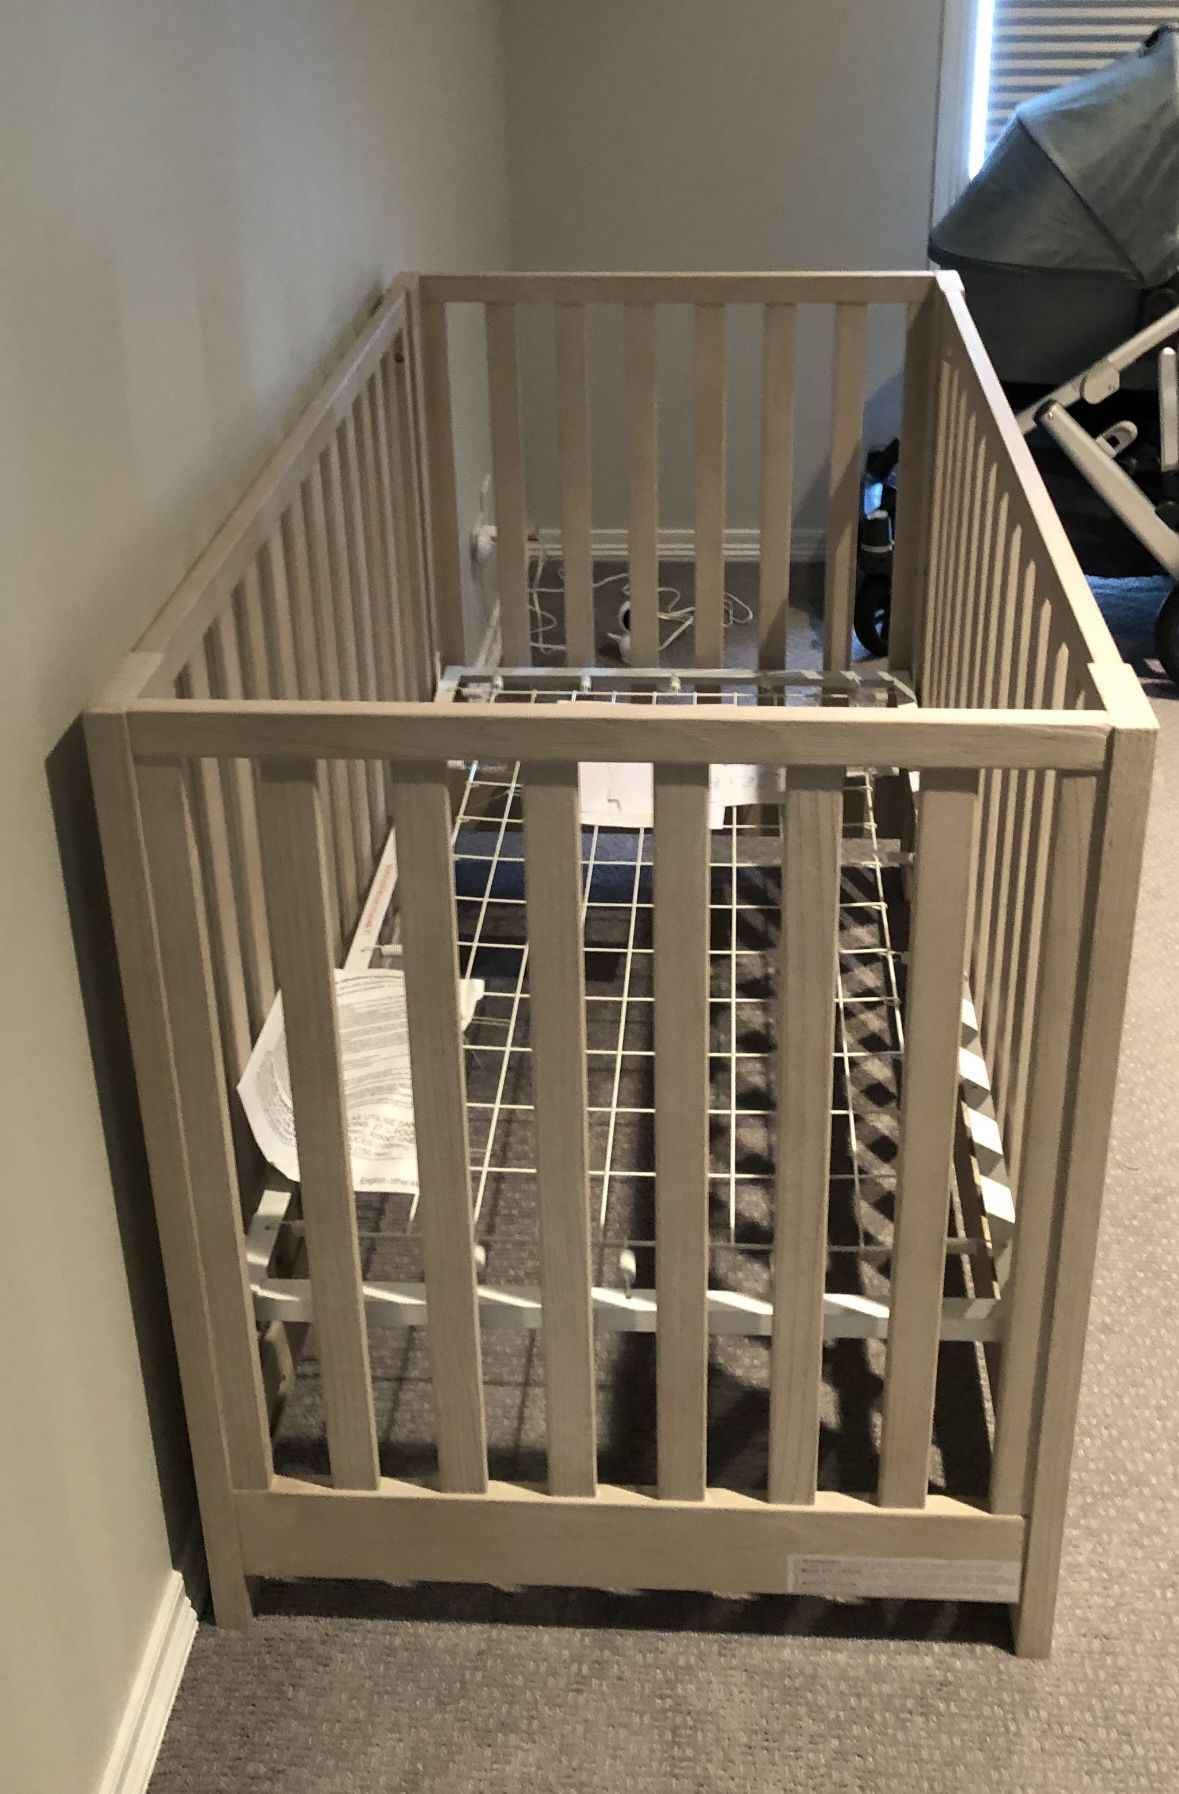 Pottery Barn Crib , Excellent Condition - Comes With Mattress (infant/toddler)